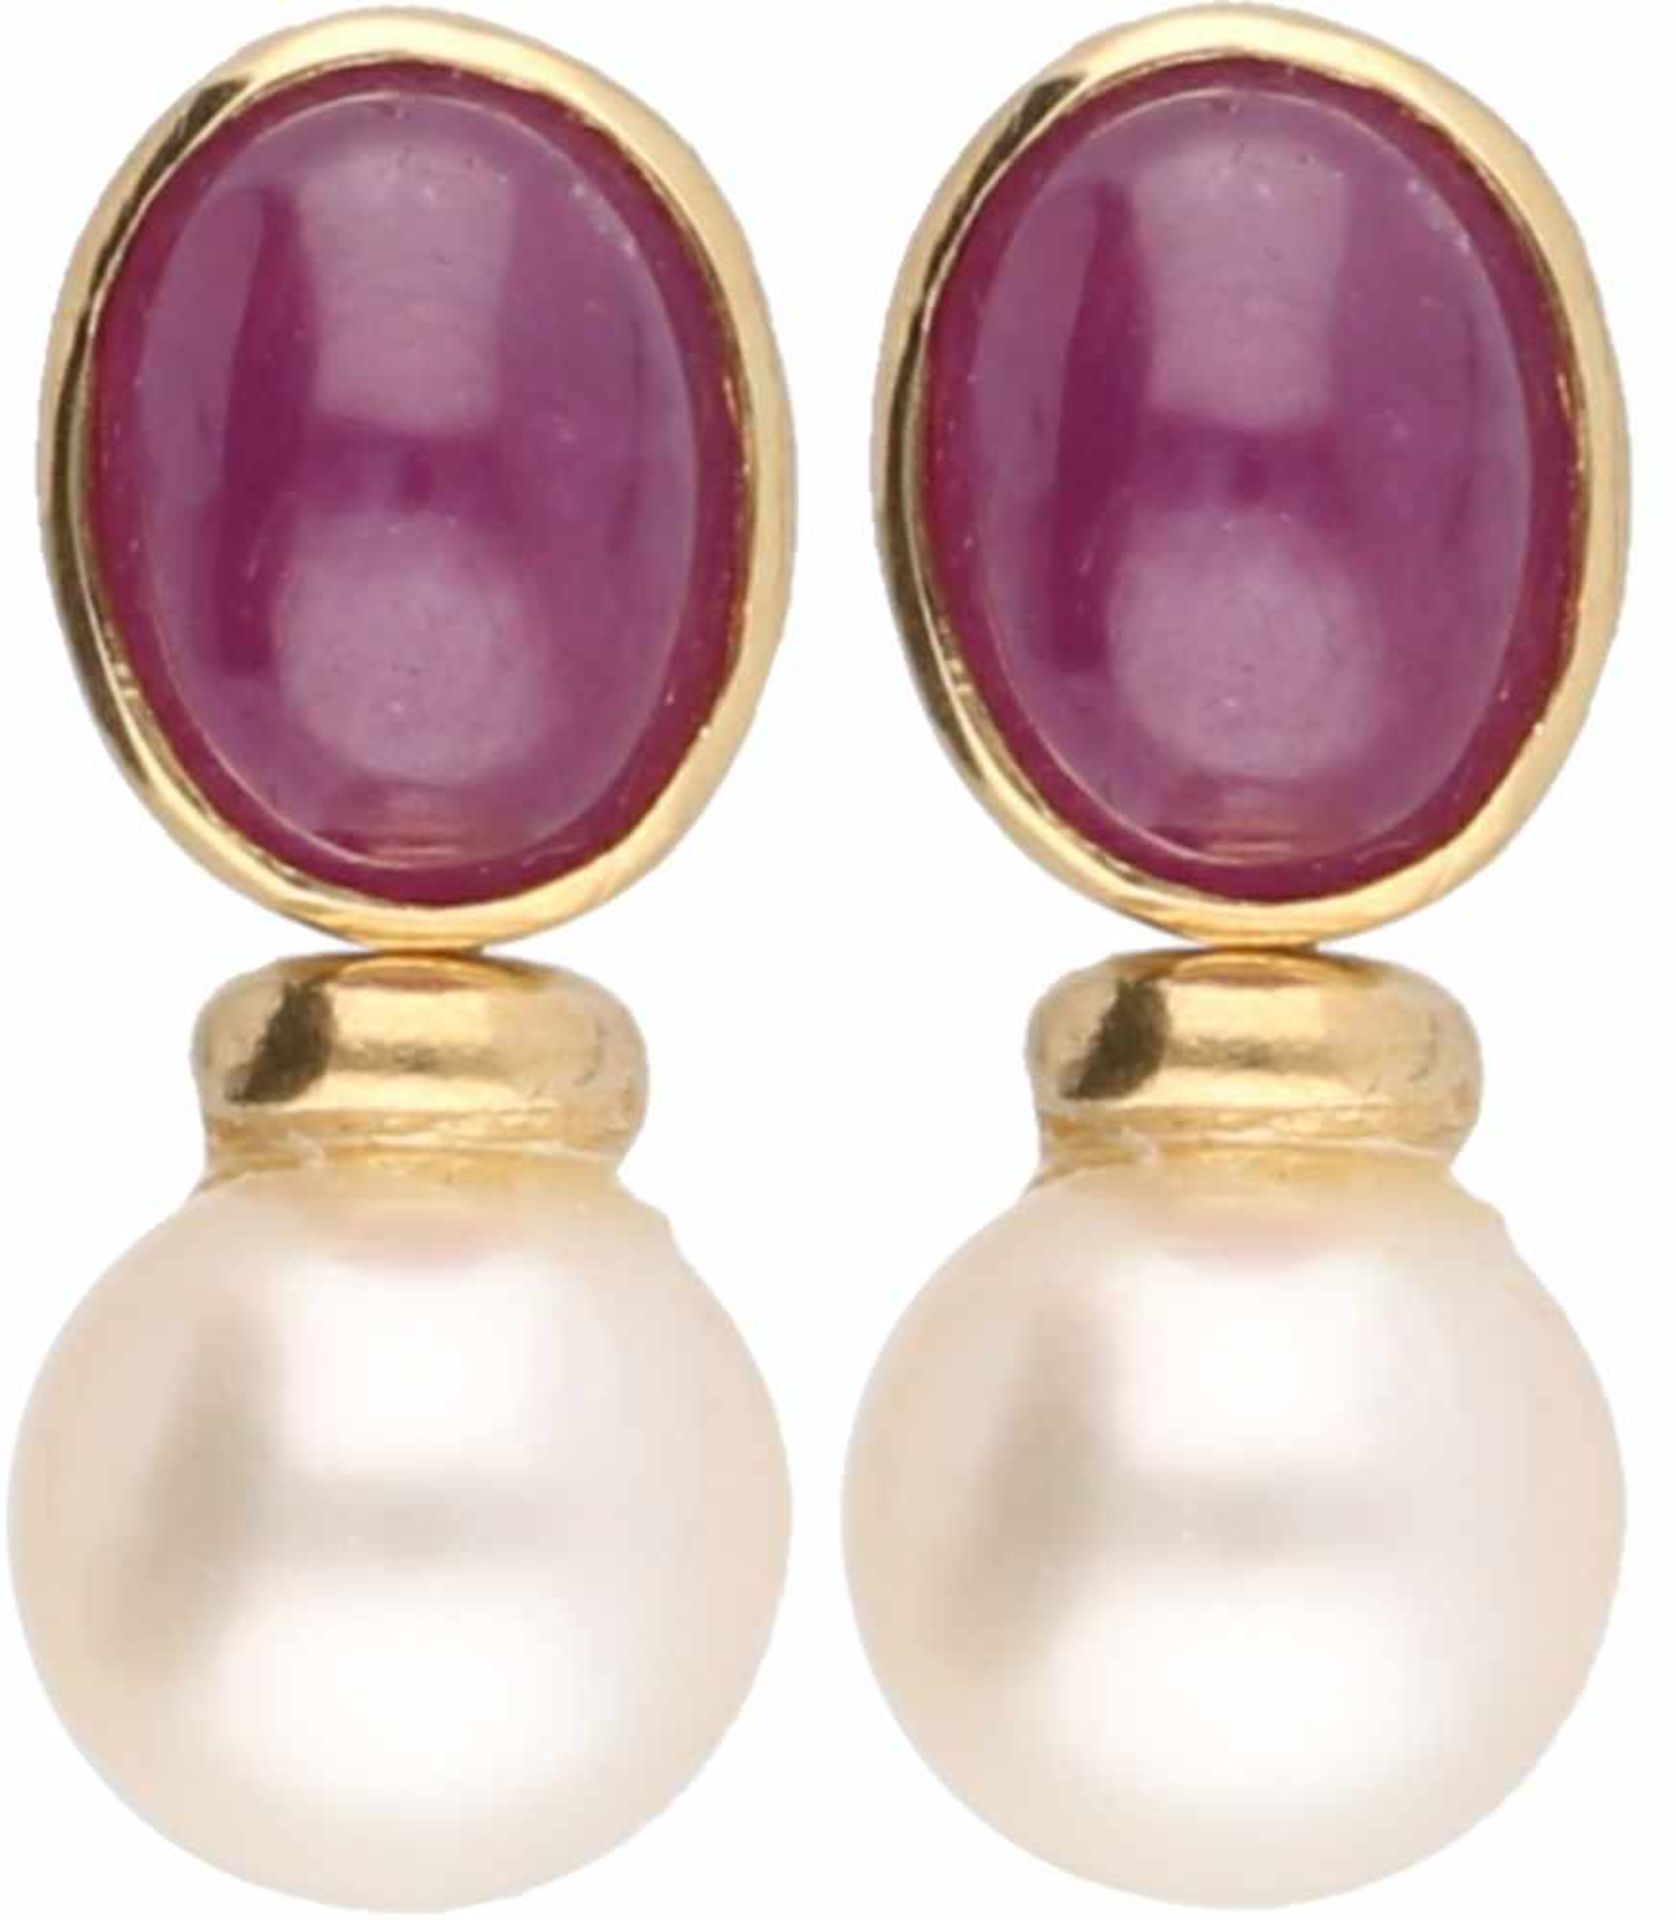 Earrings yellow gold, ruby and cultured pearl - 18 ct.